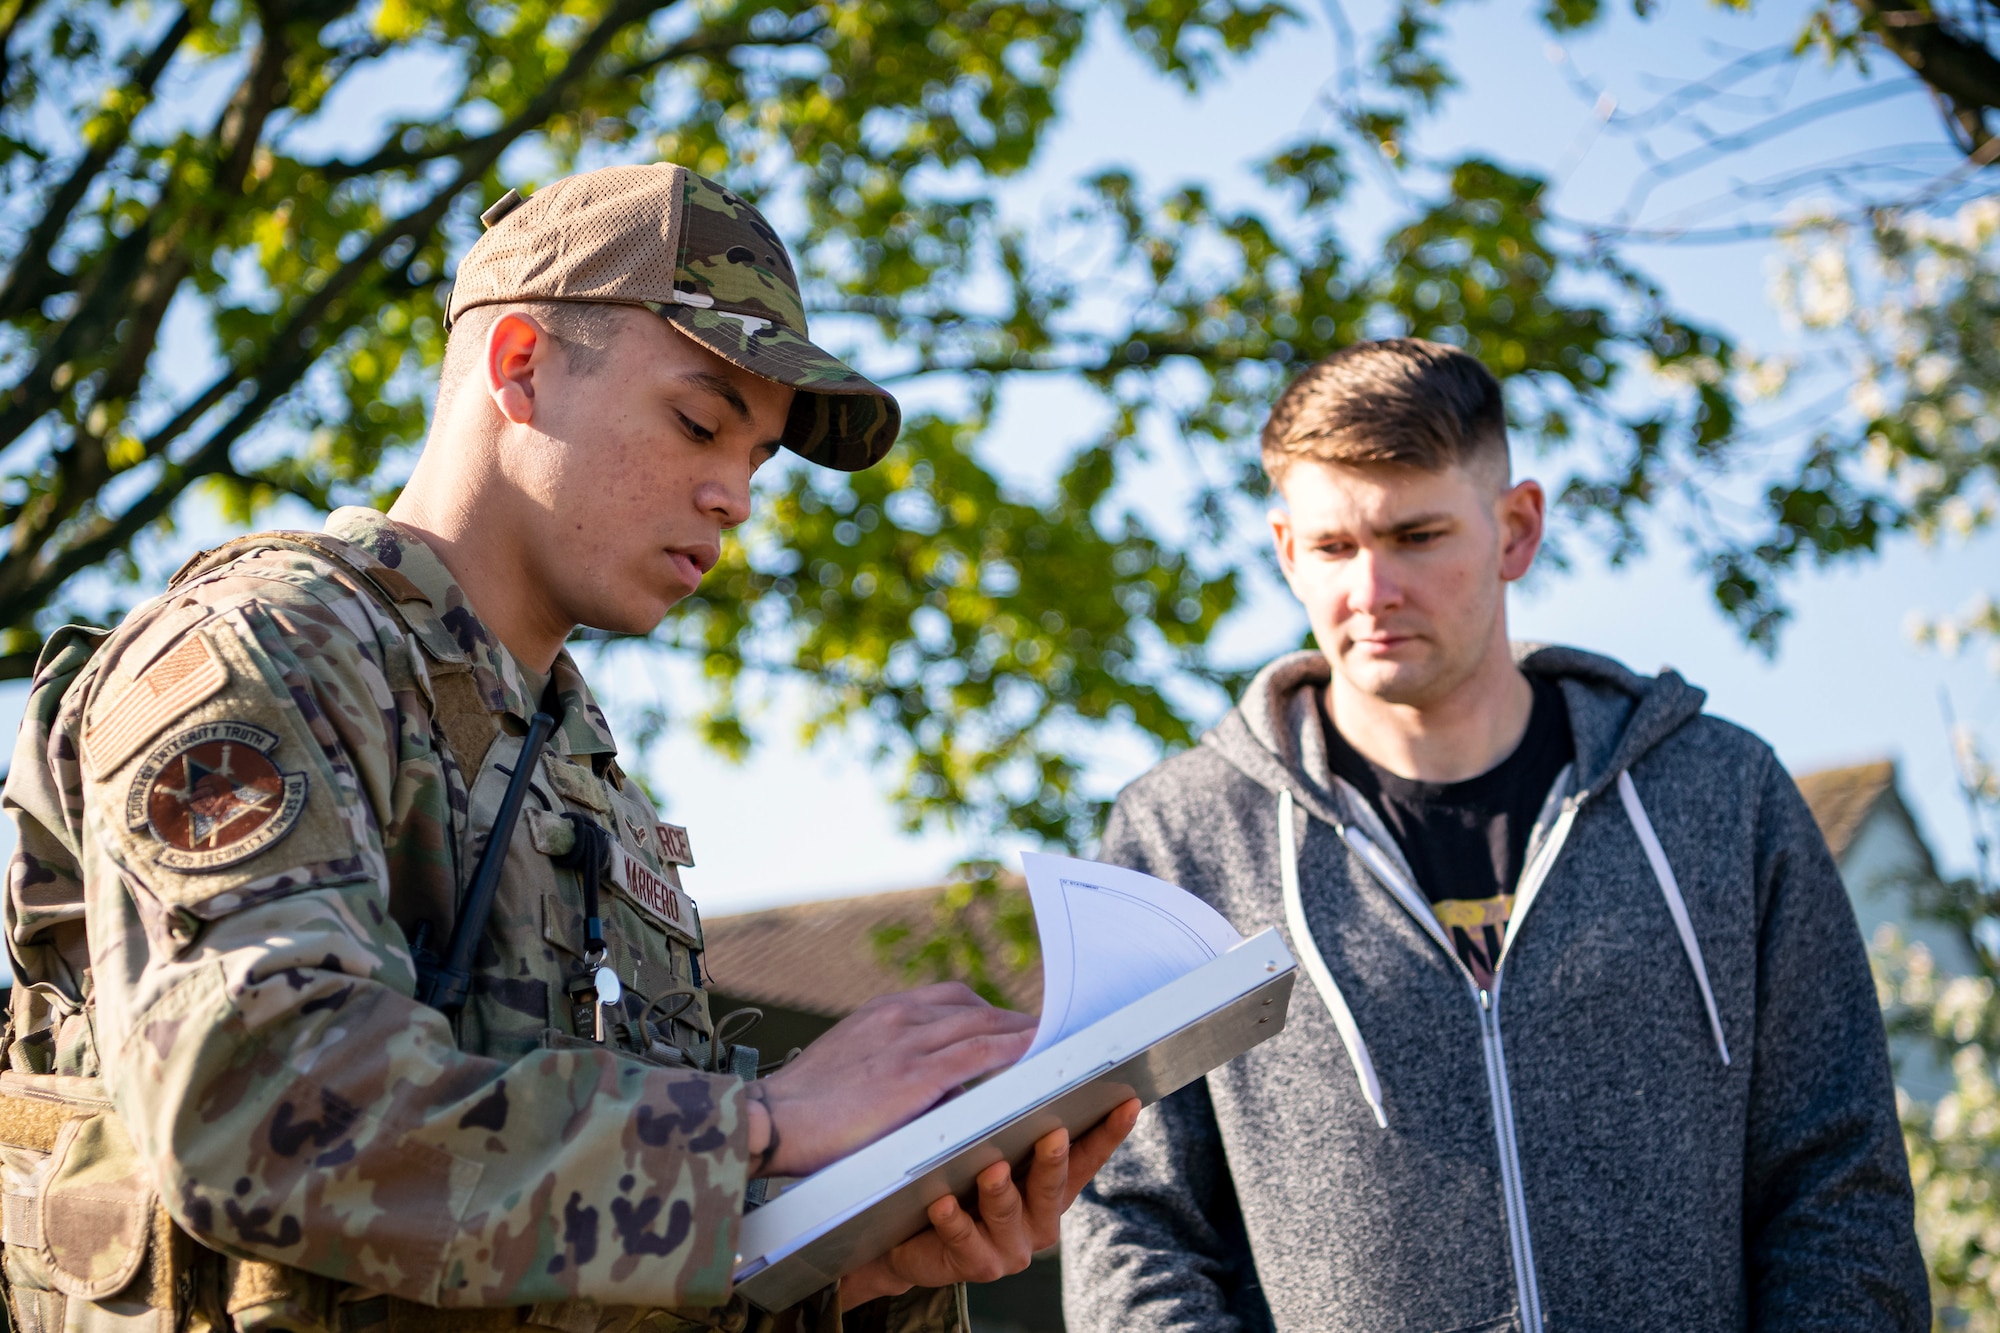 U.S. Air Force Airman 1st Class Trystan Marrero, left, 423d Security Forces Squadron patrolman, writes down a statement from a field training exercise participant at RAF Alconbury, England, April 26, 2022. The exercise was designed to evaluate the strengths and weaknesses of 423d SFS members' response to various scenarios including domestic disturbances, drunk driving and other base security incidents. (U.S. Air Force photo by Staff Sgt. Eugene Oliver)